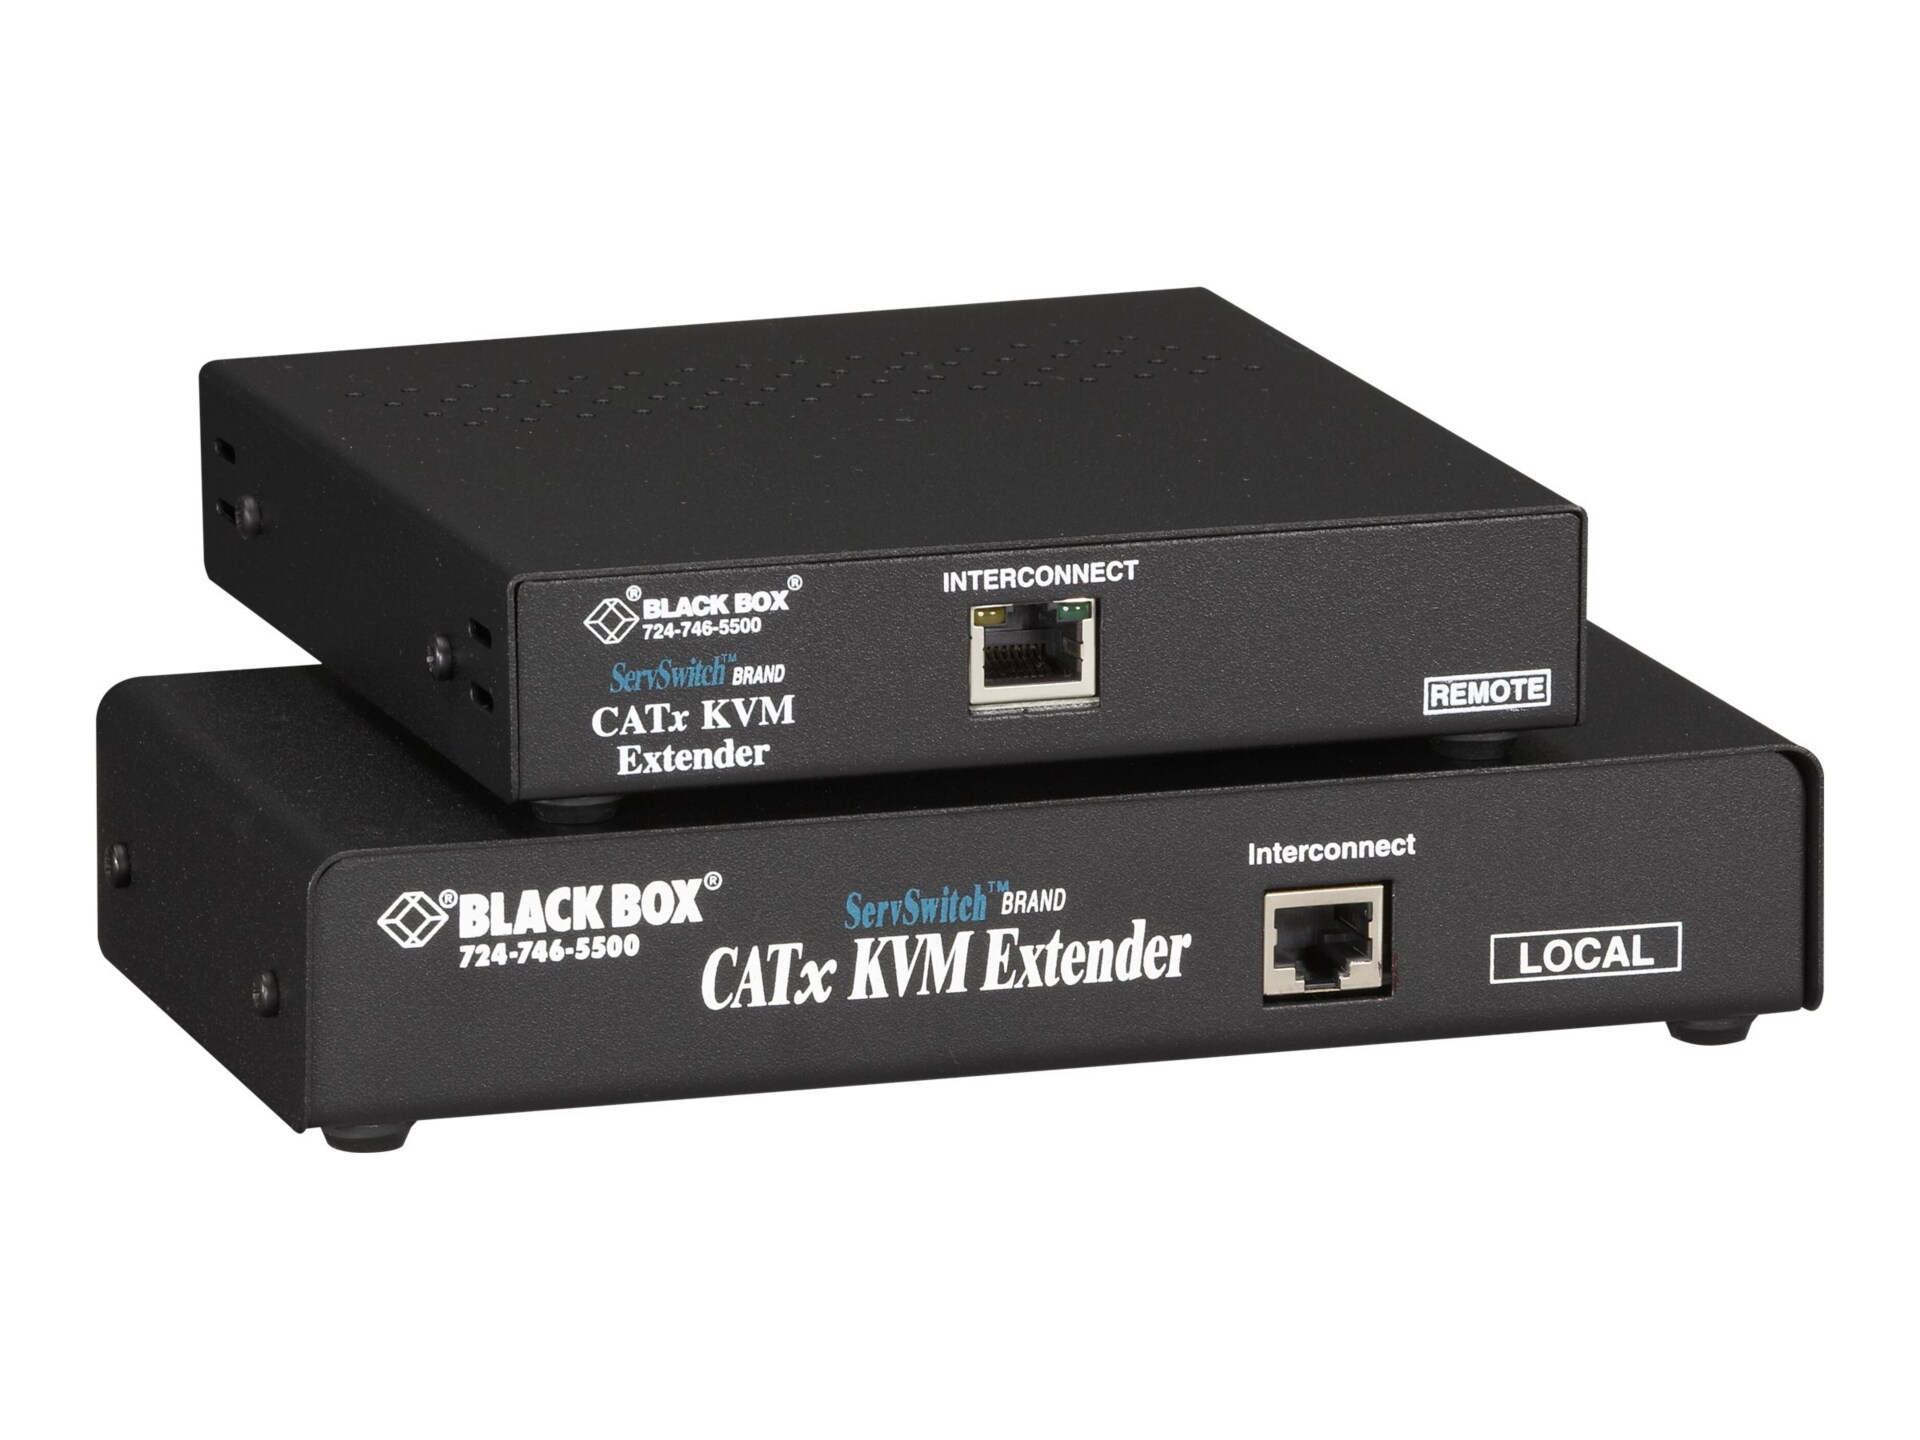 Black Box Dual-Access Kit for Point-to-Point Extension